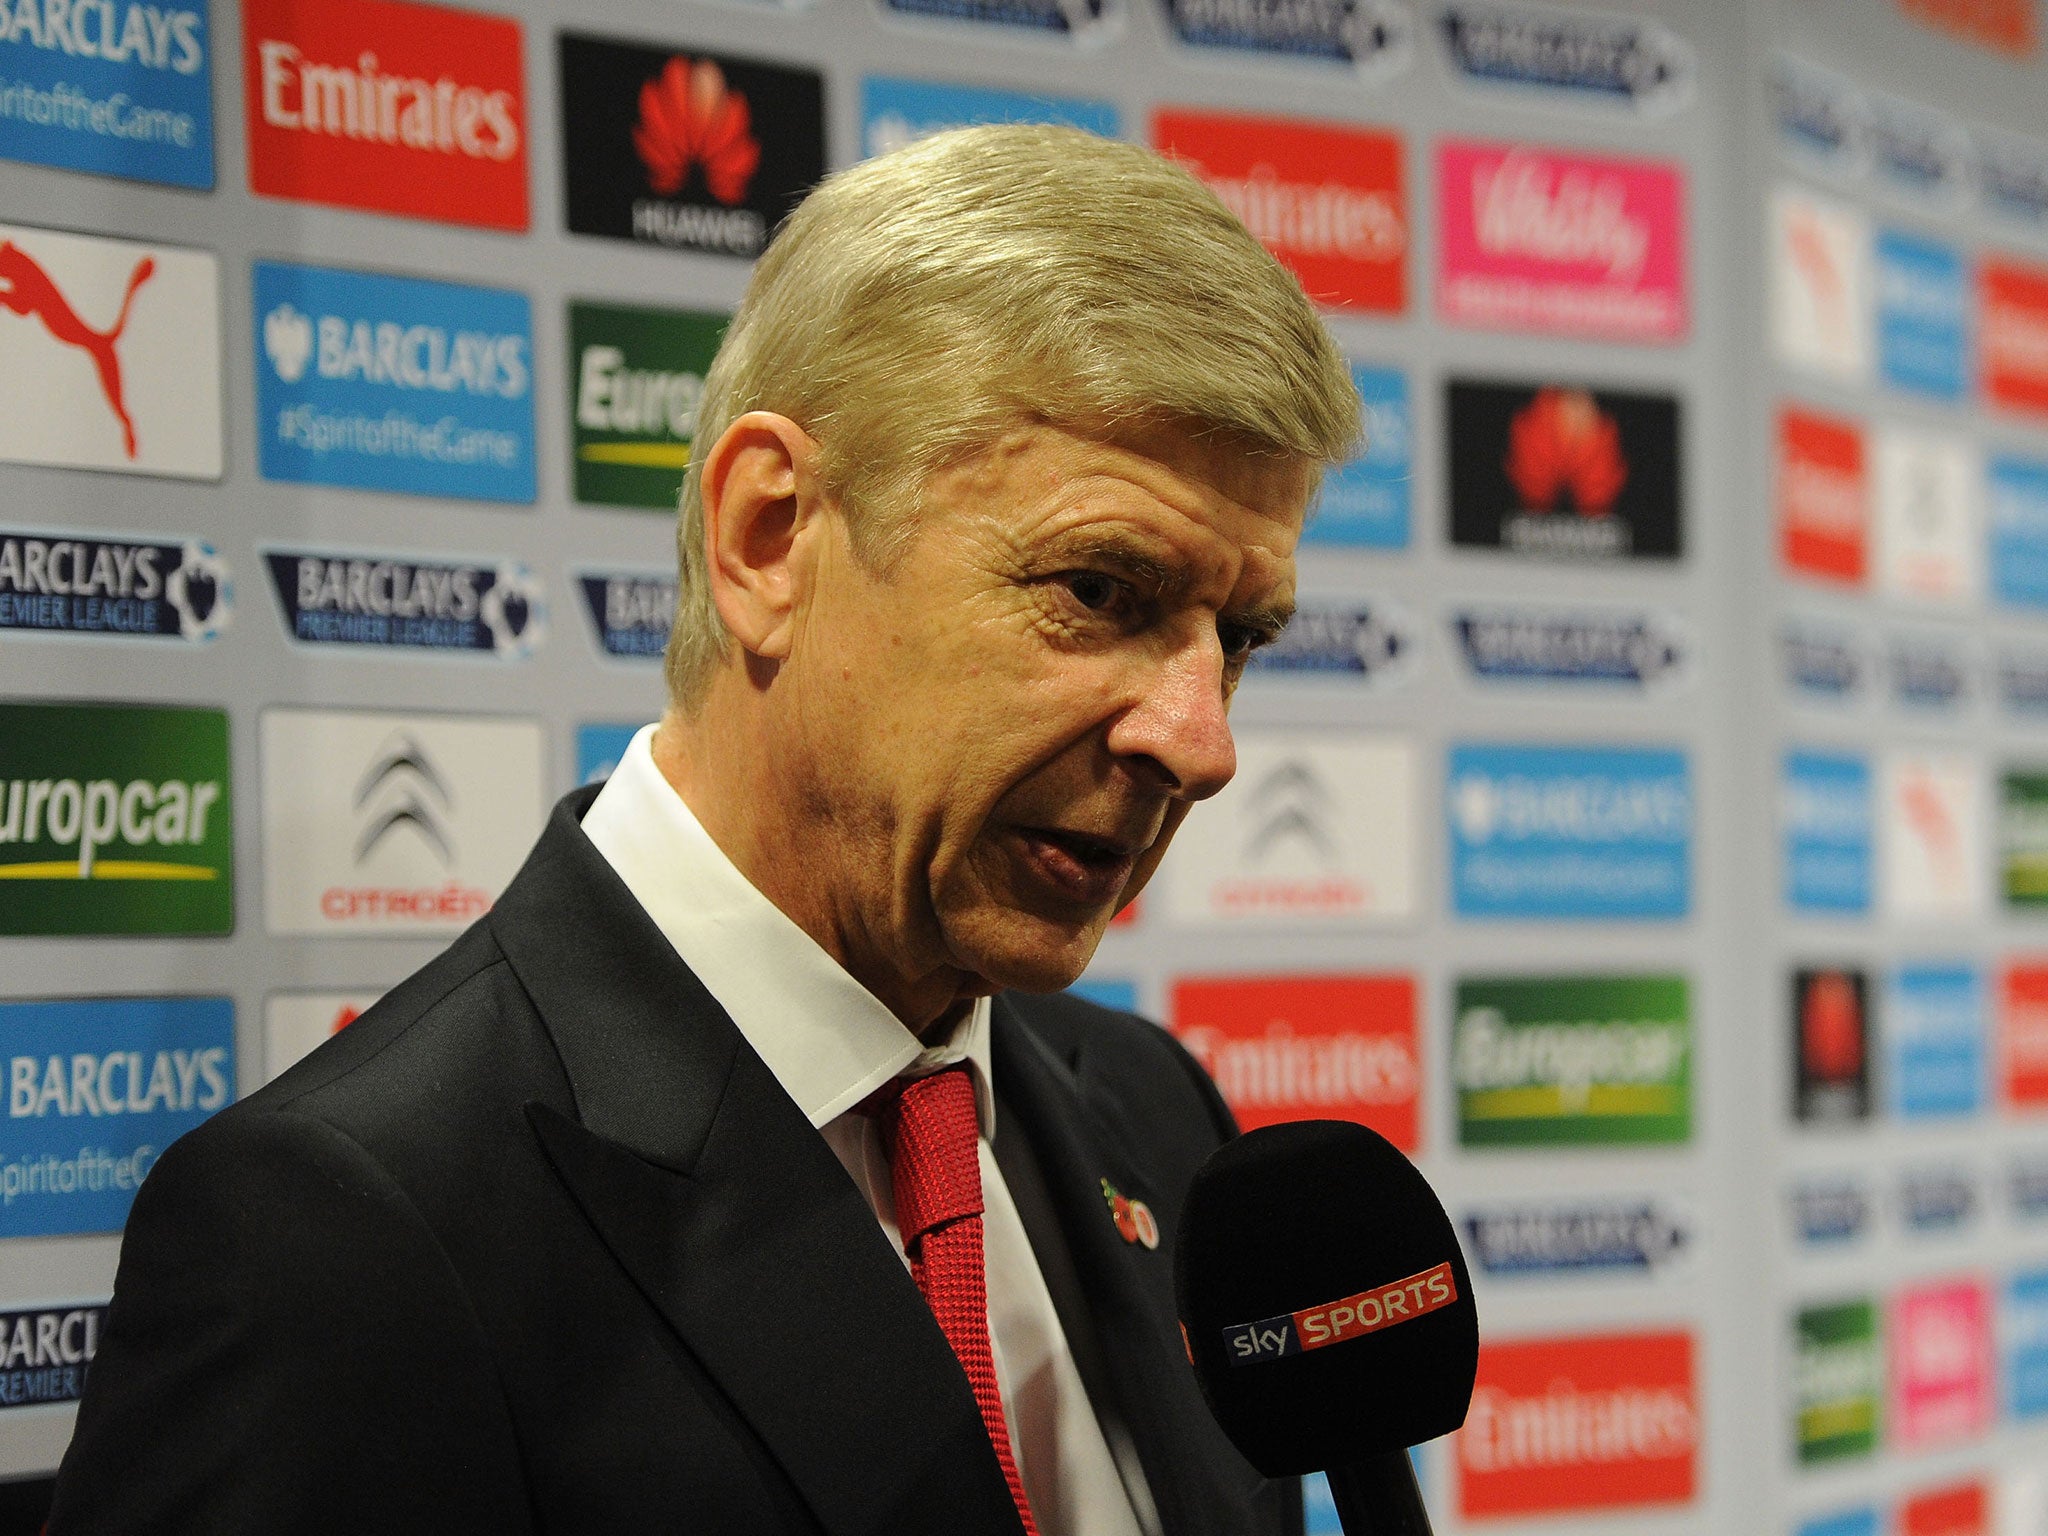 Arsenal manager Arsene Wenger was due to be at the Stade de France when it was targeted by terrorists